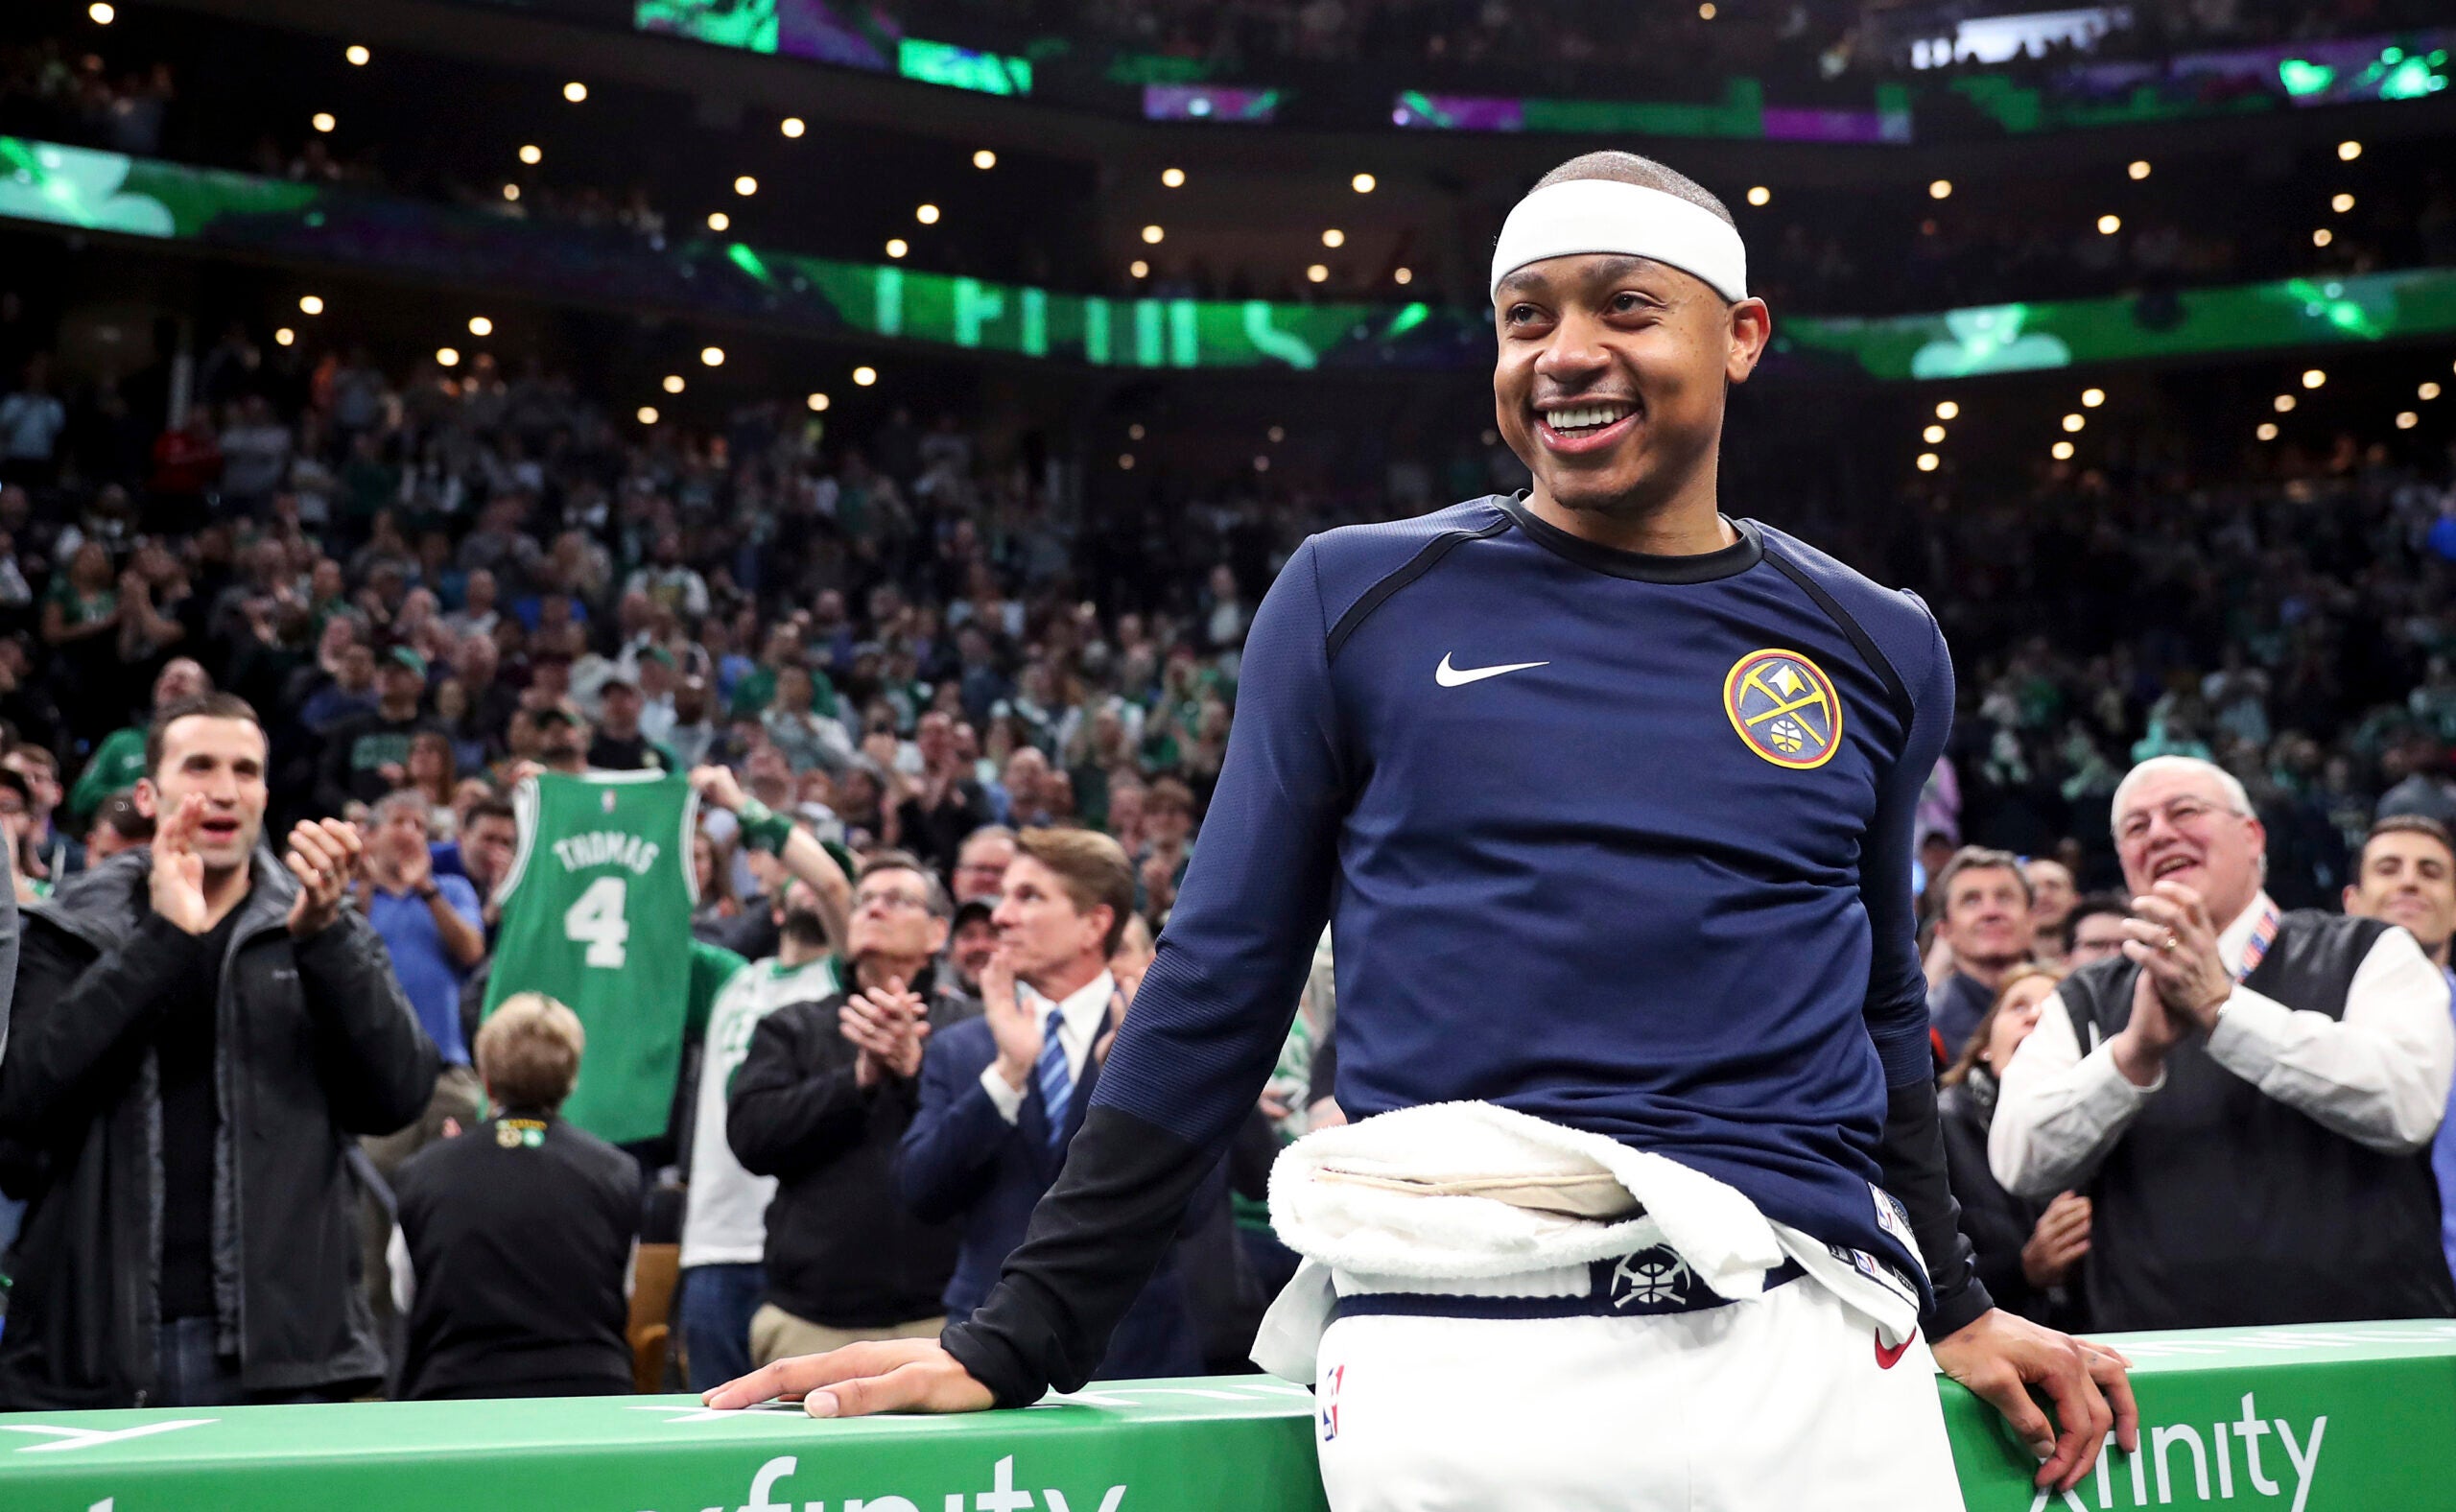 Isaiah Thomas Dropped 33 to Honor Sister in 2017 Playoff Game